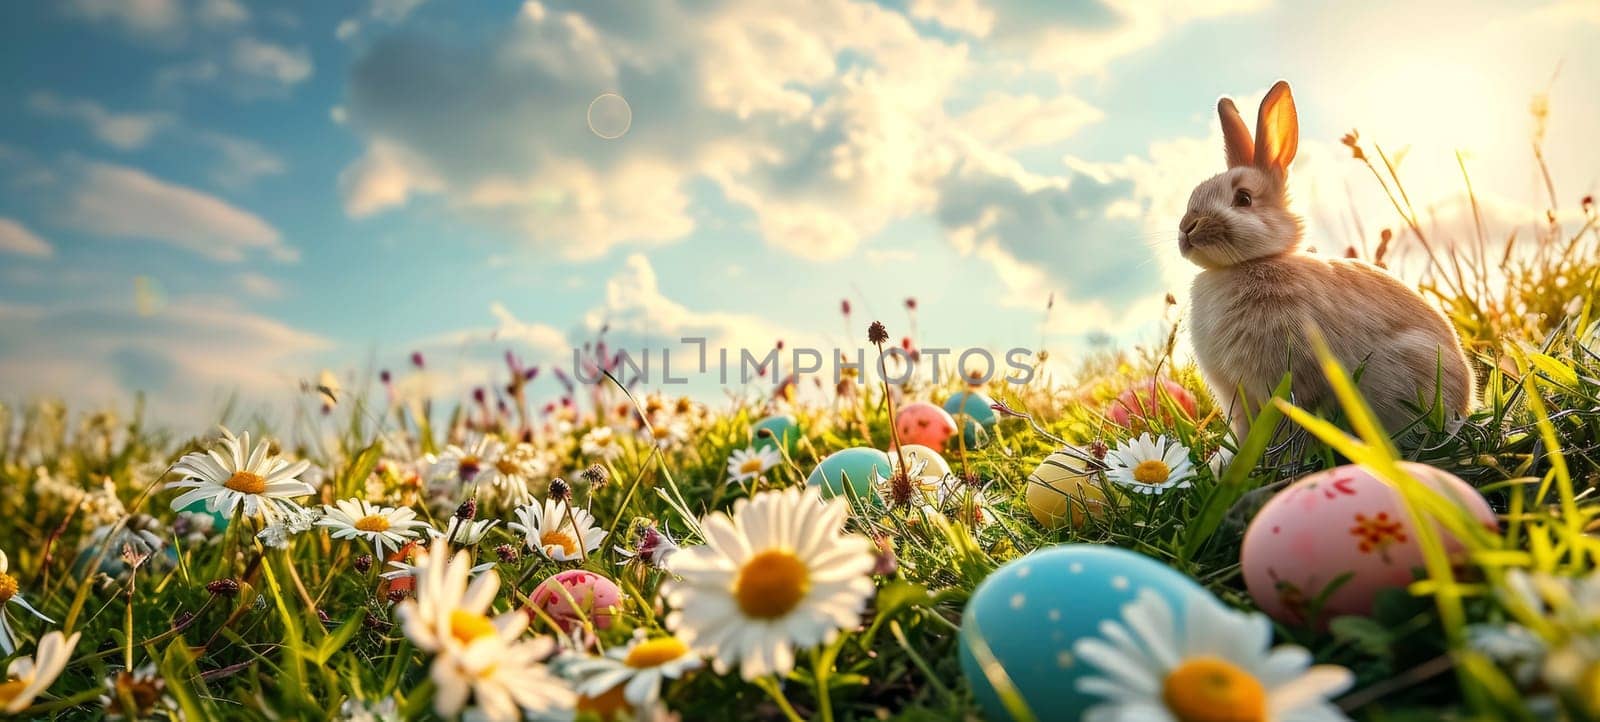 Rabbit among Easter eggs in a spring meadow with daisies. Outdoor holiday scene with copy space. Easter and springtime concept for design and print